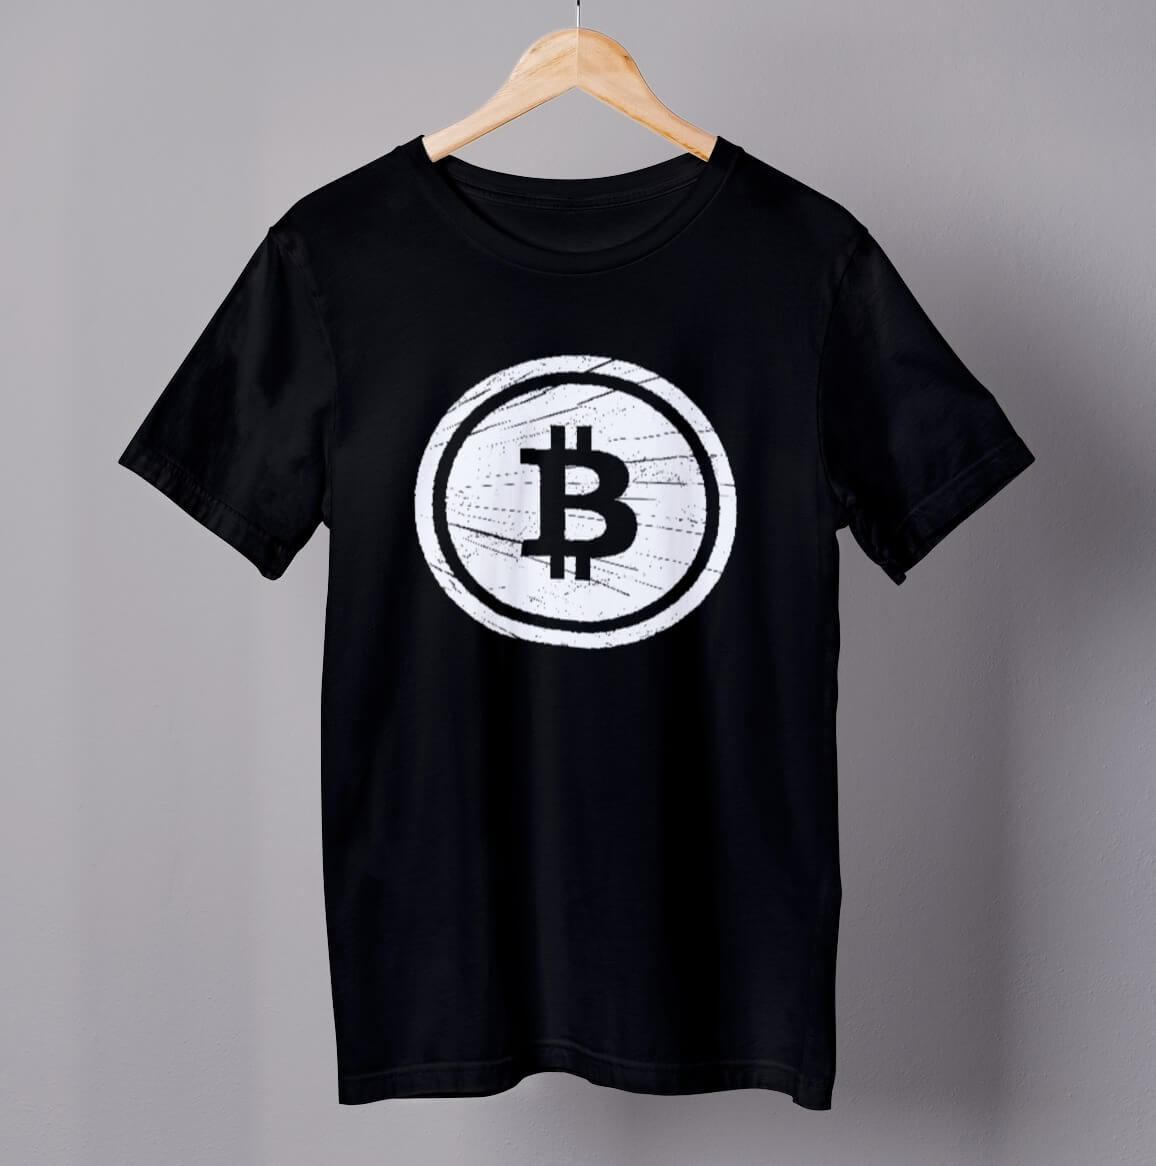 Bitcoin White Logo Cryptocurrency Graphic Black T-shirt